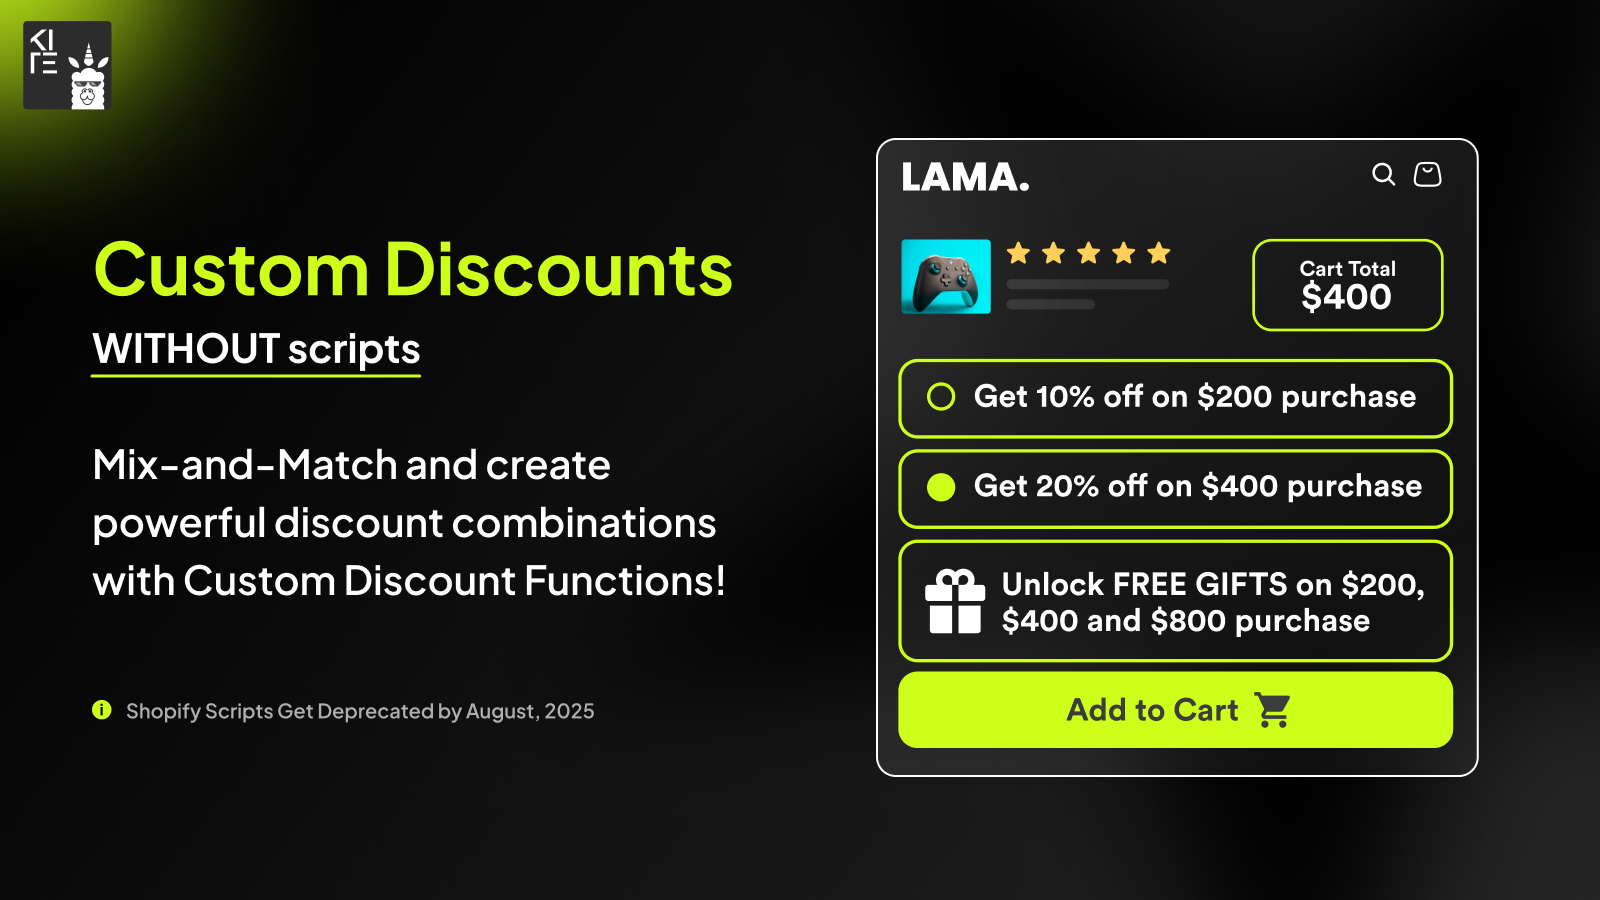 Custom Discounts using latest functions WITHOUT scripts